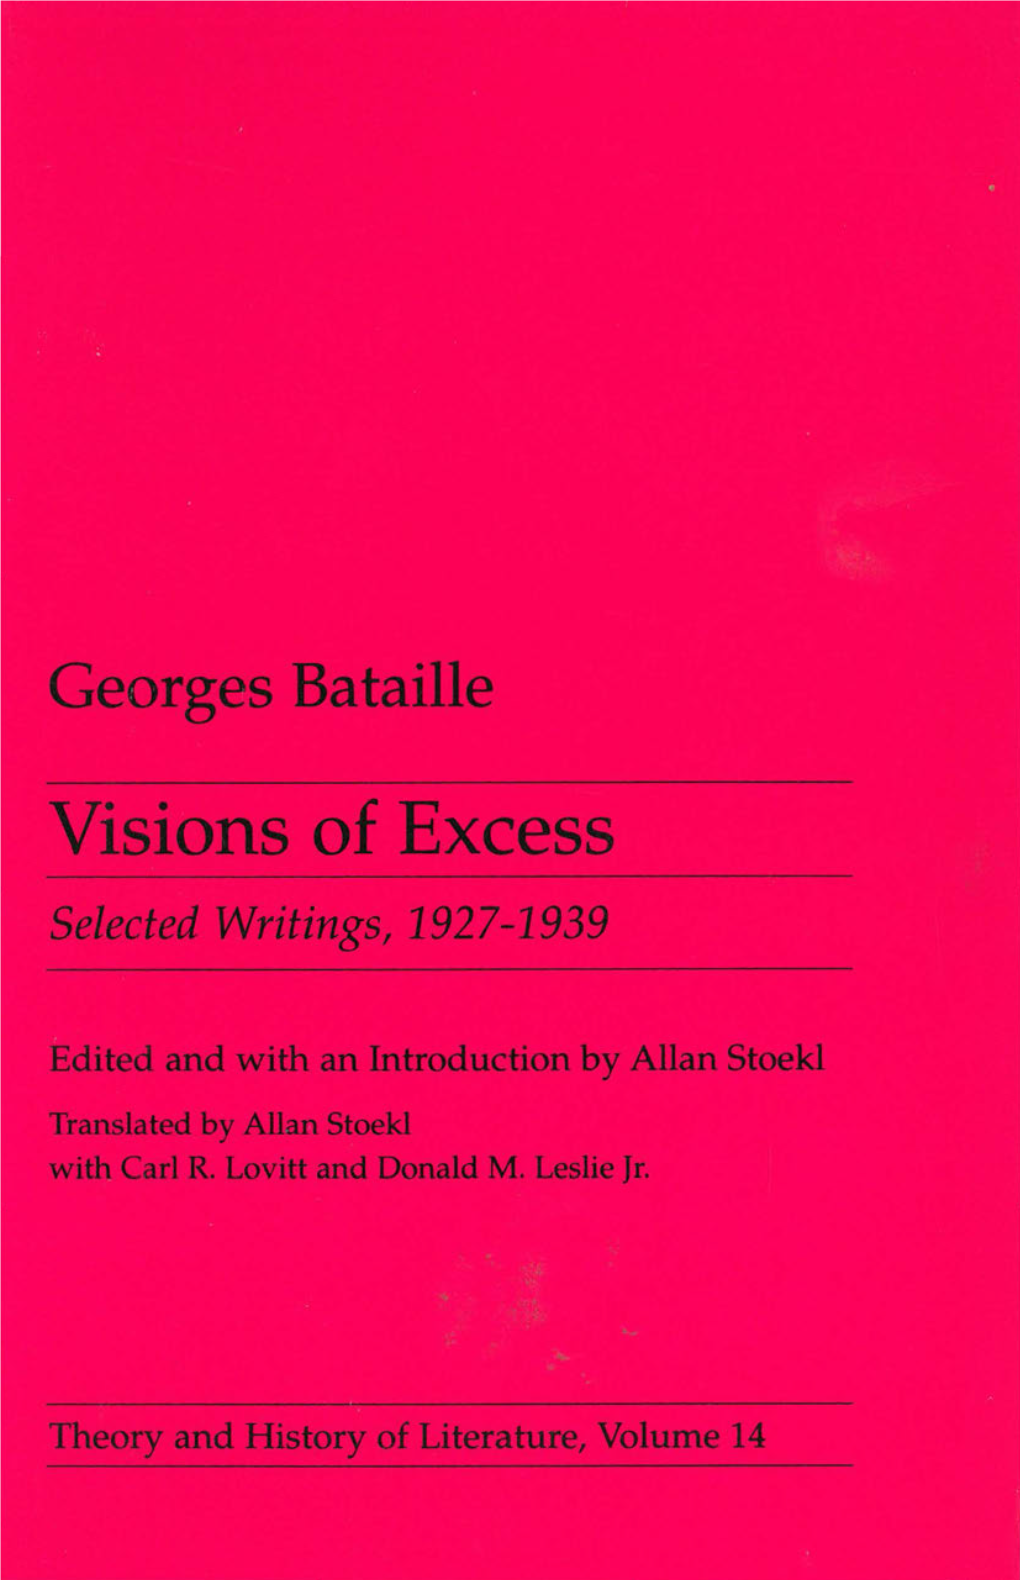 Bataille Visions of Excess: Selected Writings, 1927-1939 Visions of Excess Selected 1927-1939